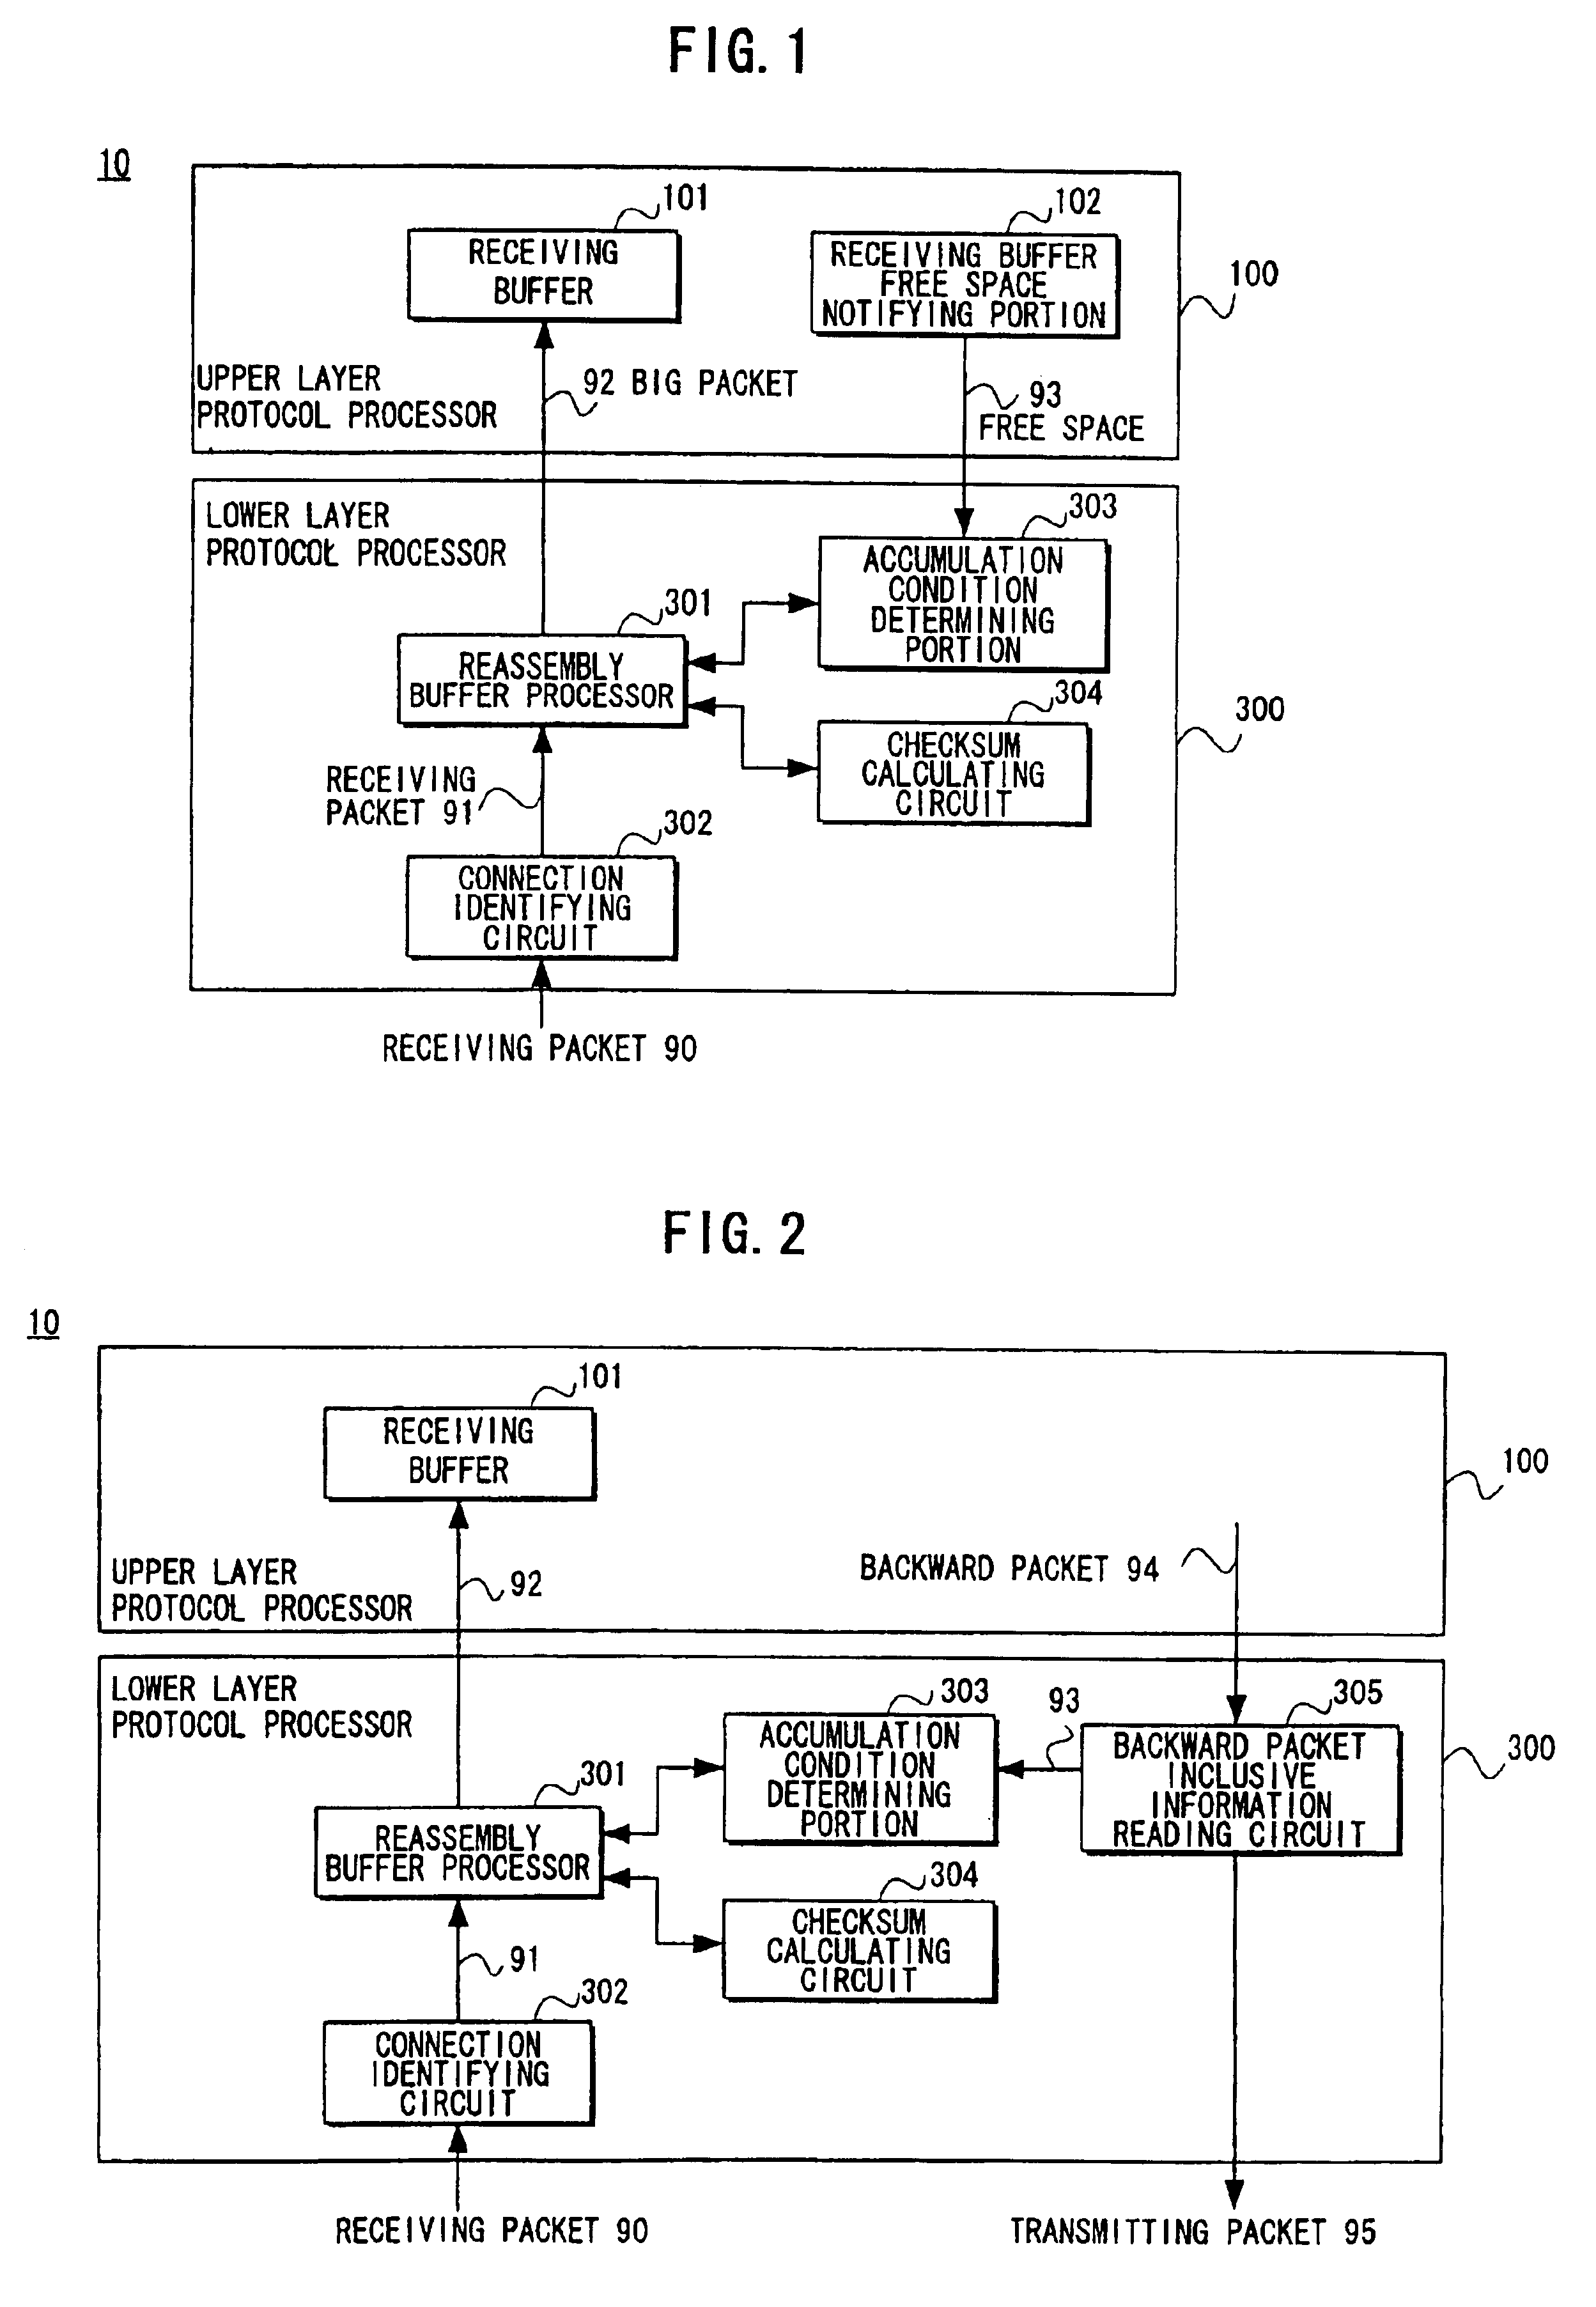 Packet processing device